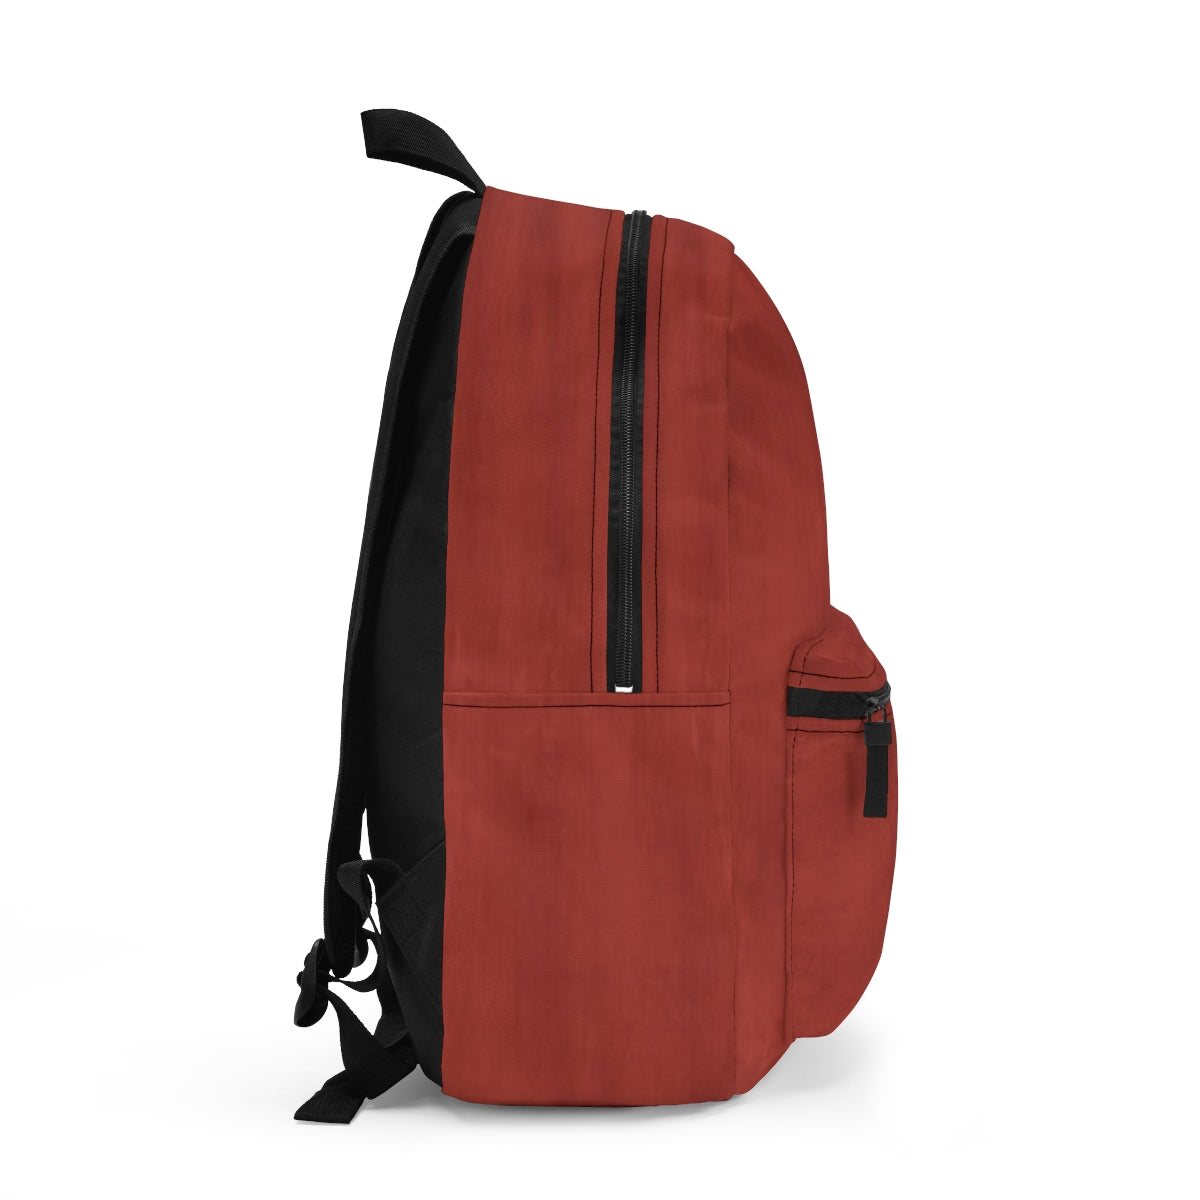 Autumn Red Backpack